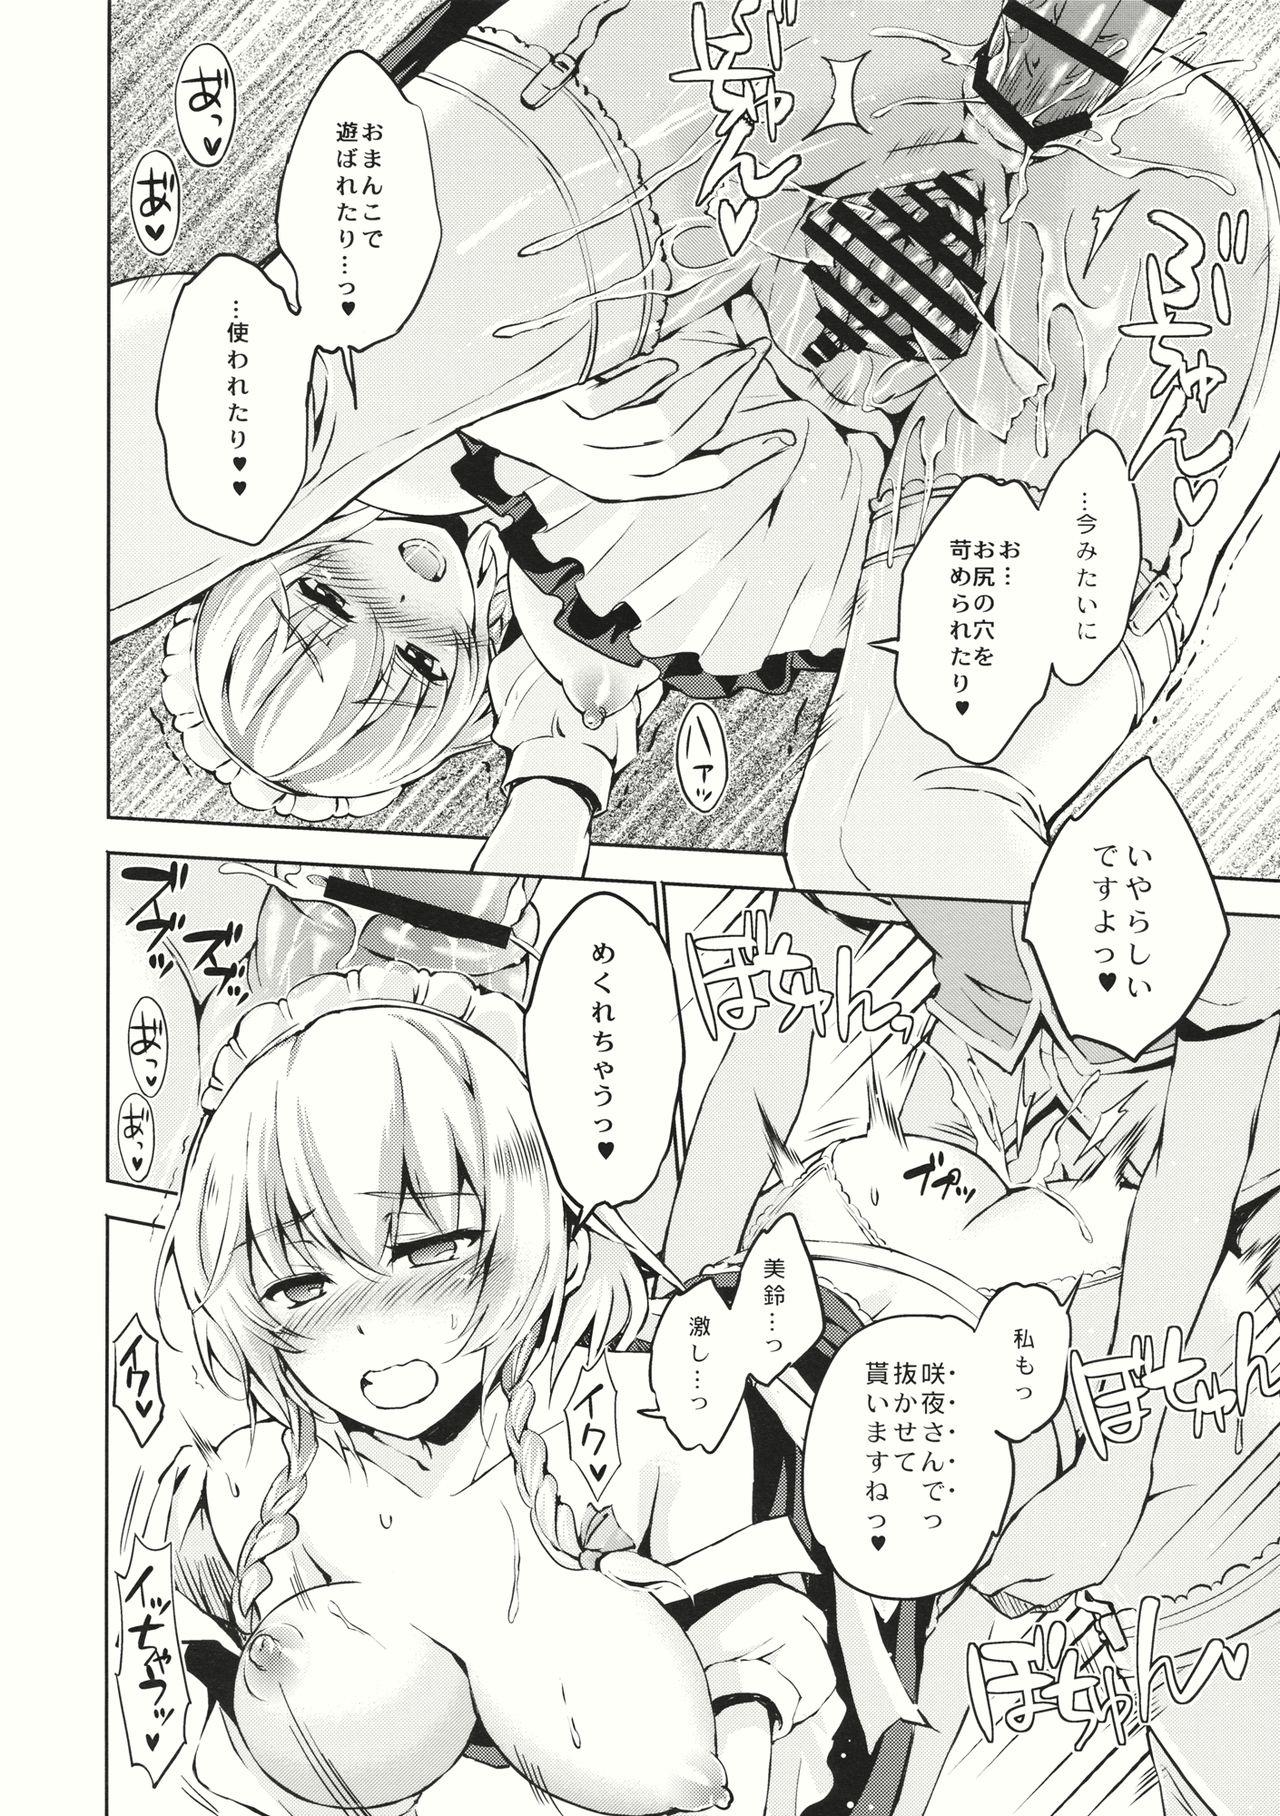 Old Man Sugar Drag - Touhou project Celebrity Porn - Page 7